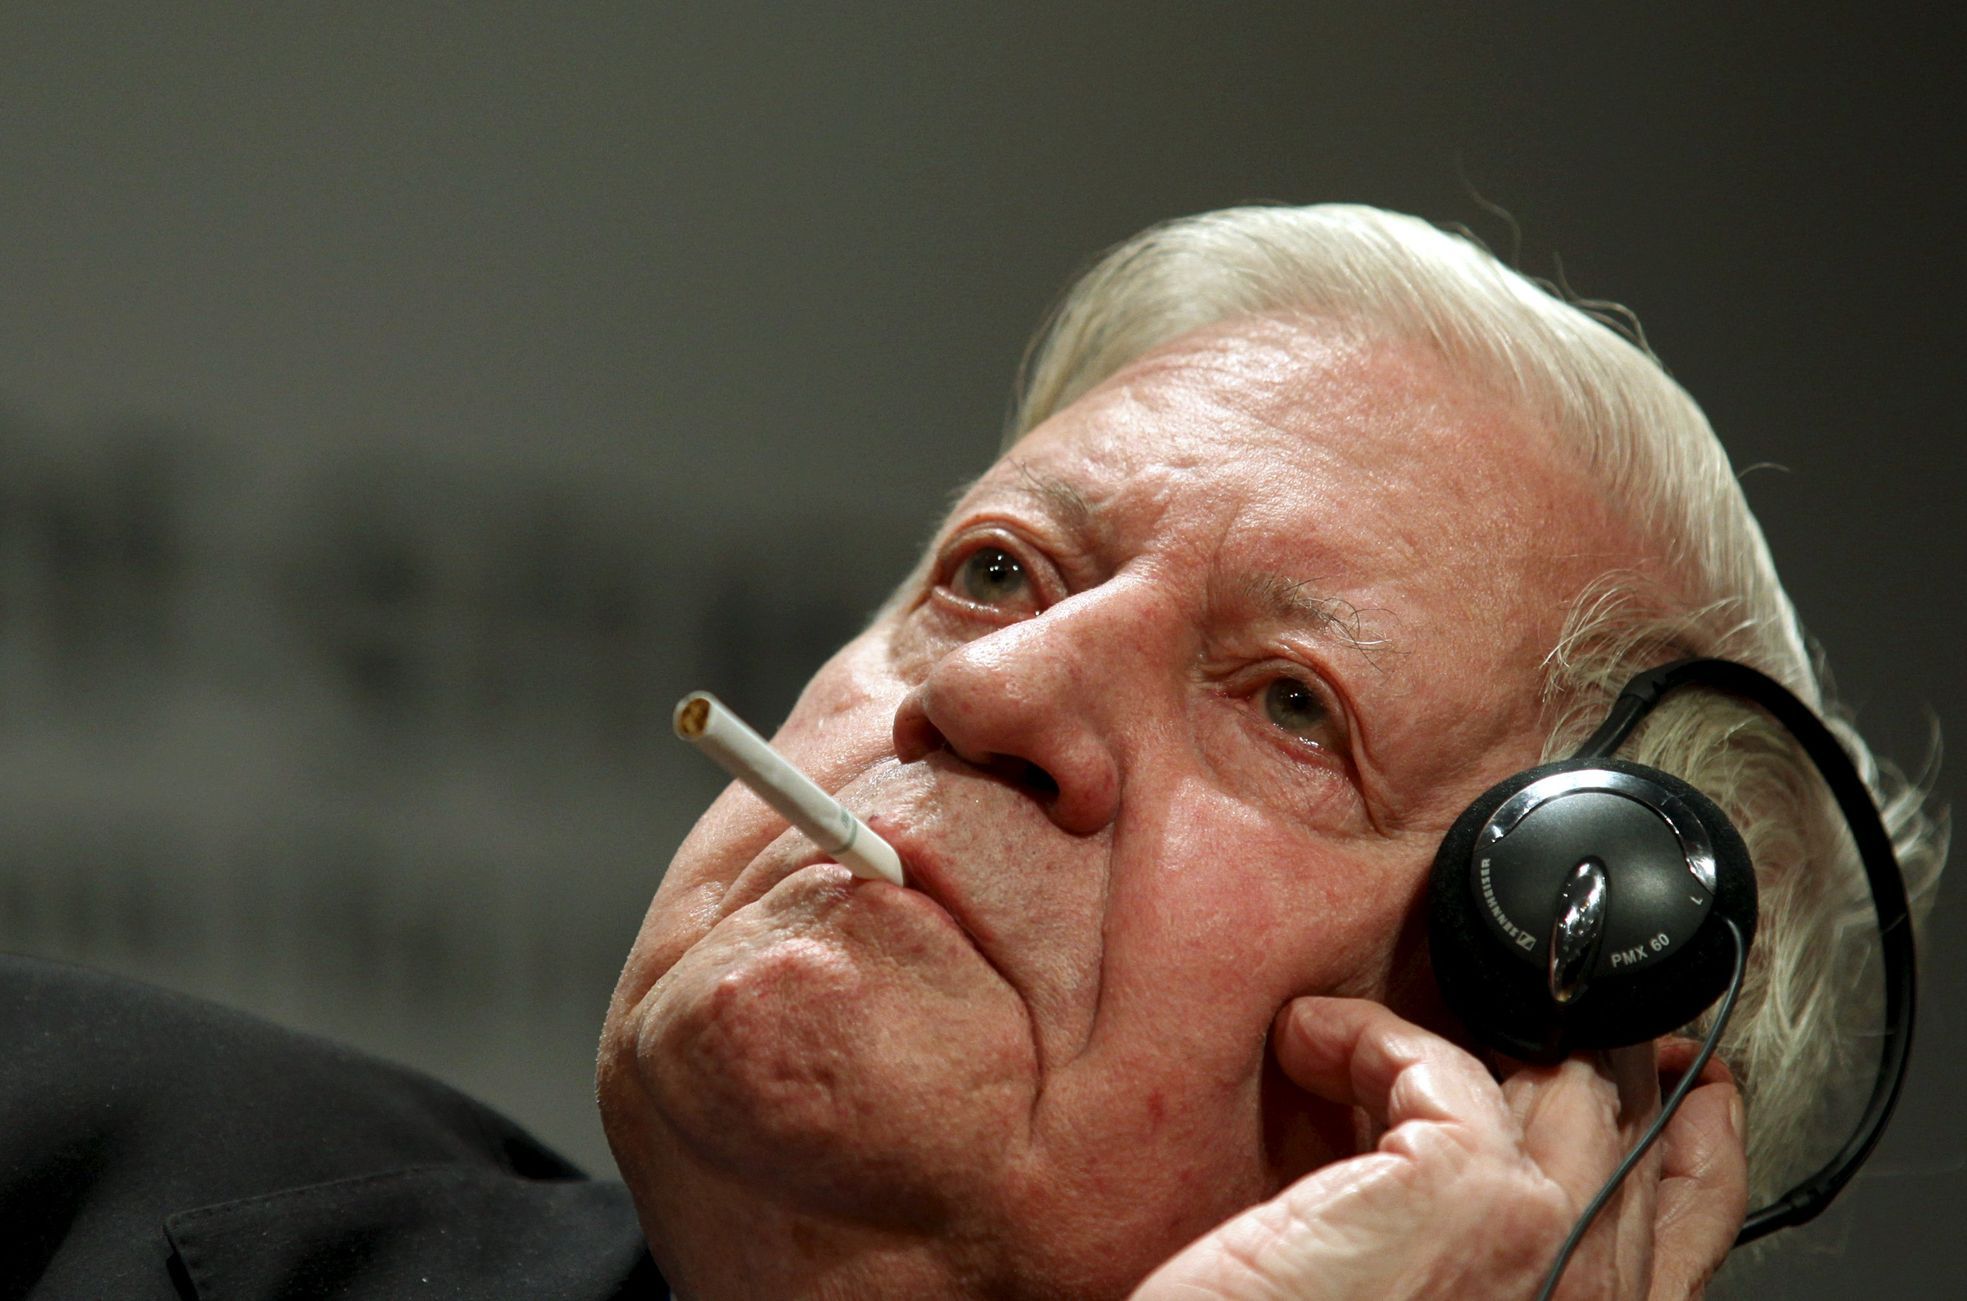 File photo shows former German Chancellor Schmidt smoking during ceremony marking 50th anniversary of Bergedorfer Forum of Koerber Foundation in Berlin